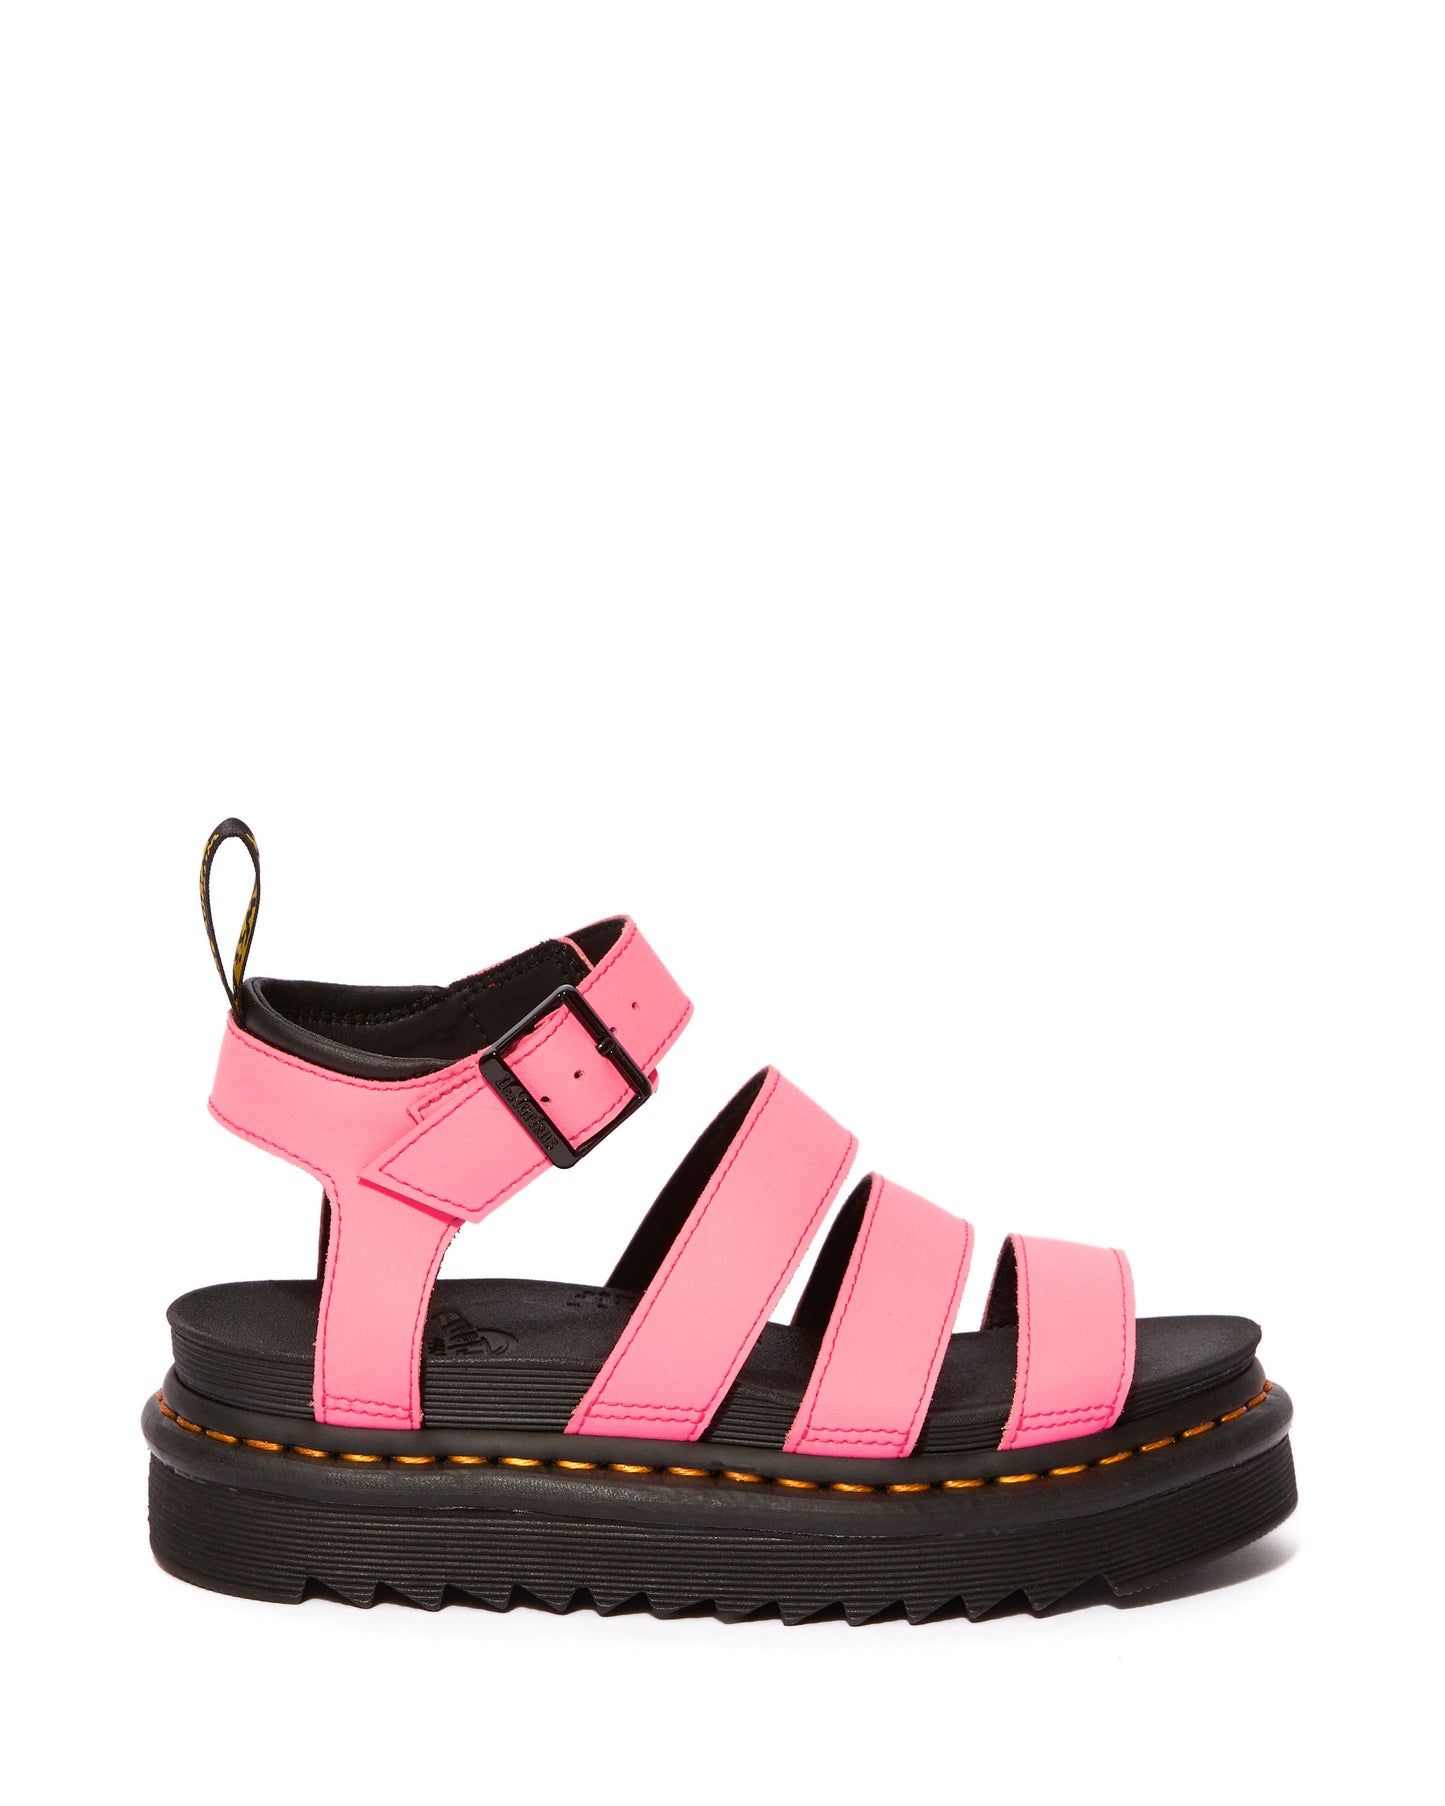 BLAIRE PINK HYDRO GLADIATOR SANDALS